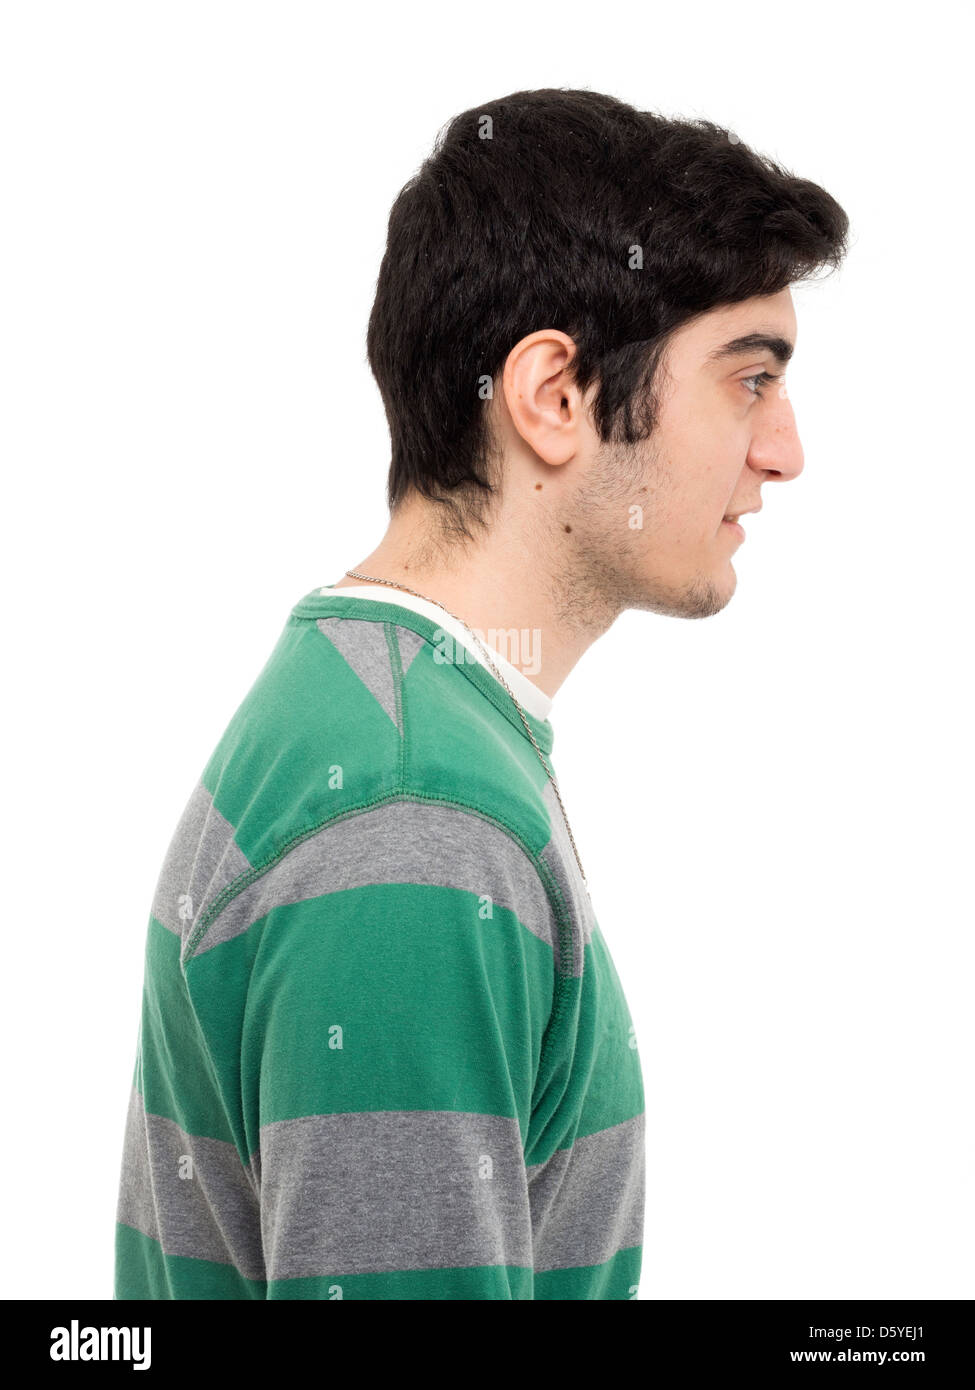 Profile portrait of young man Stock Photo